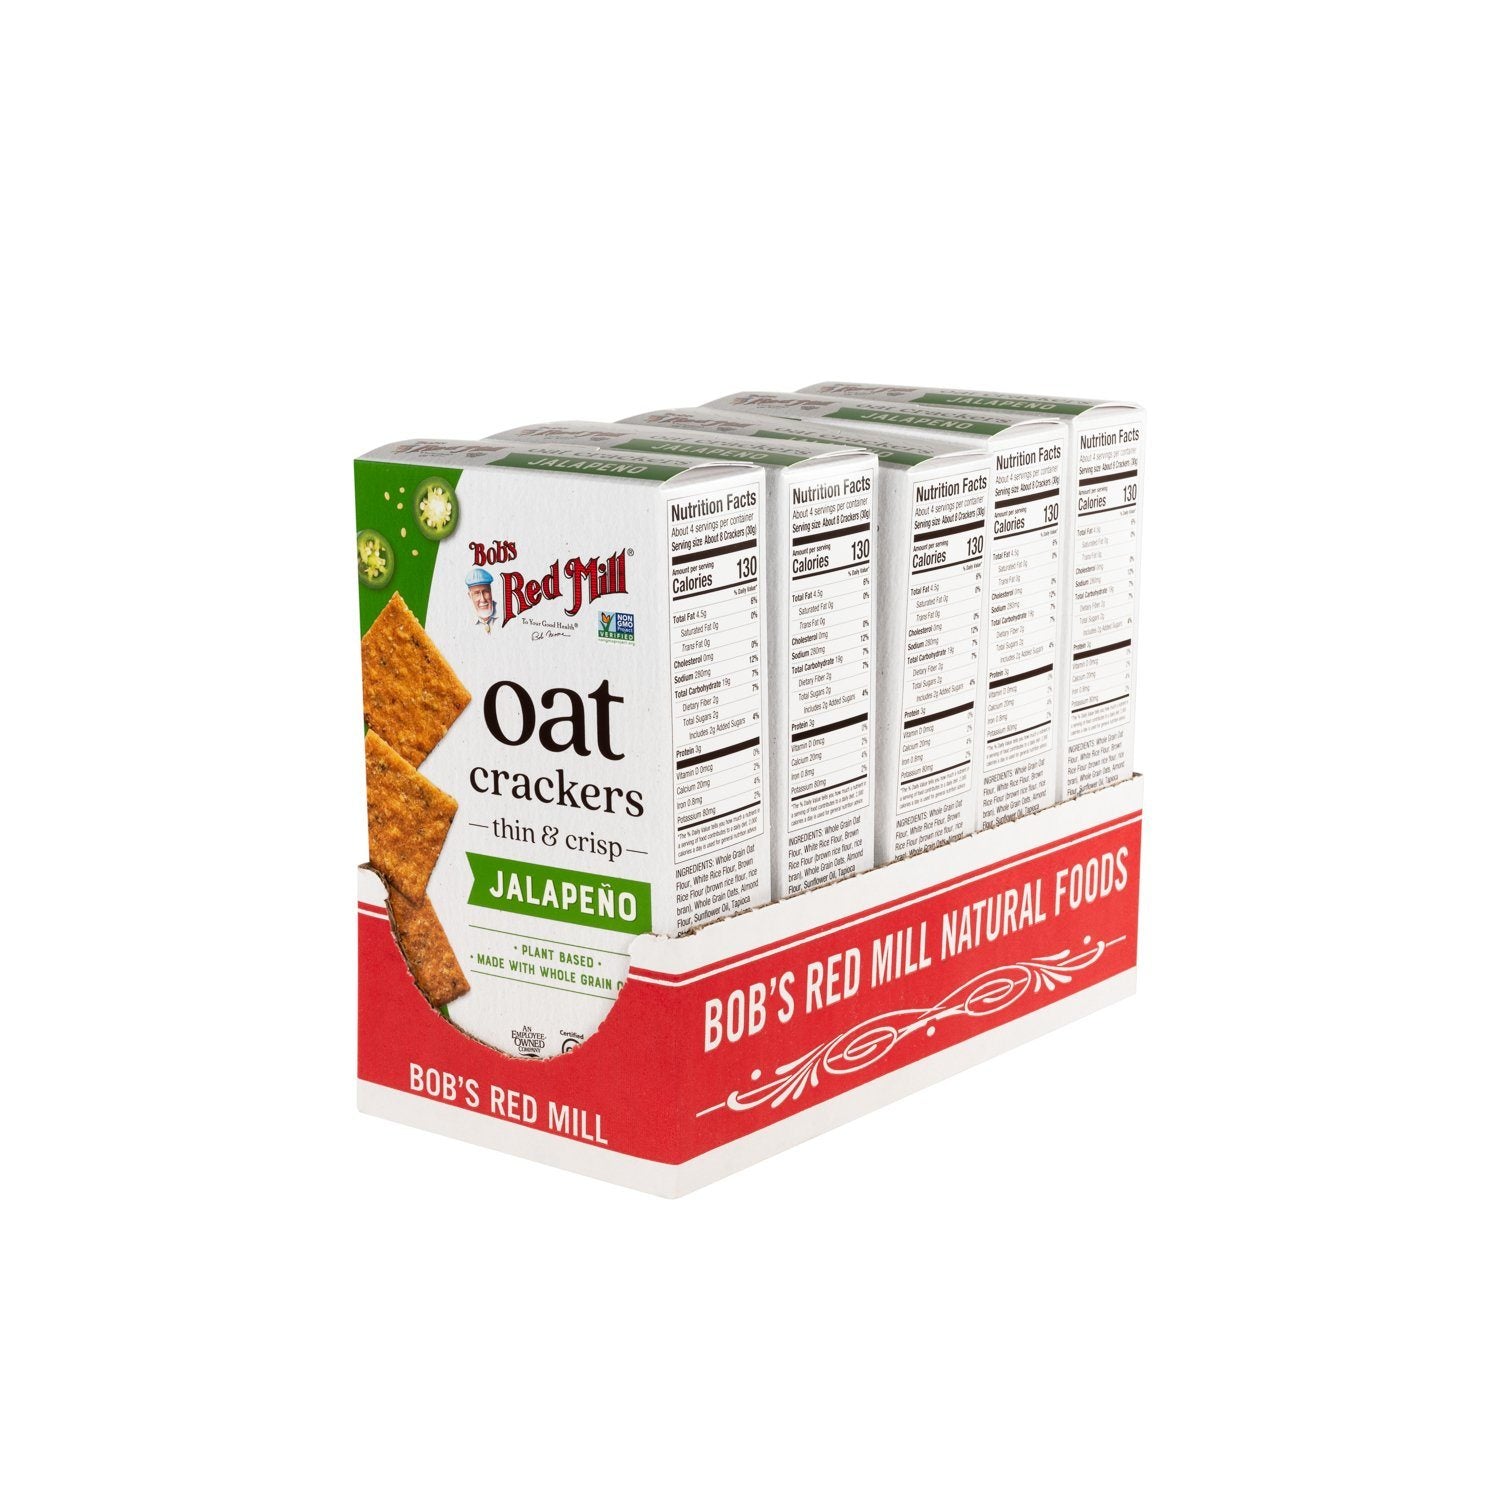 Bob's Red Mill Oat Crackers Bob's Red Mill Jalapeno 4.25 Oz-5 Count 